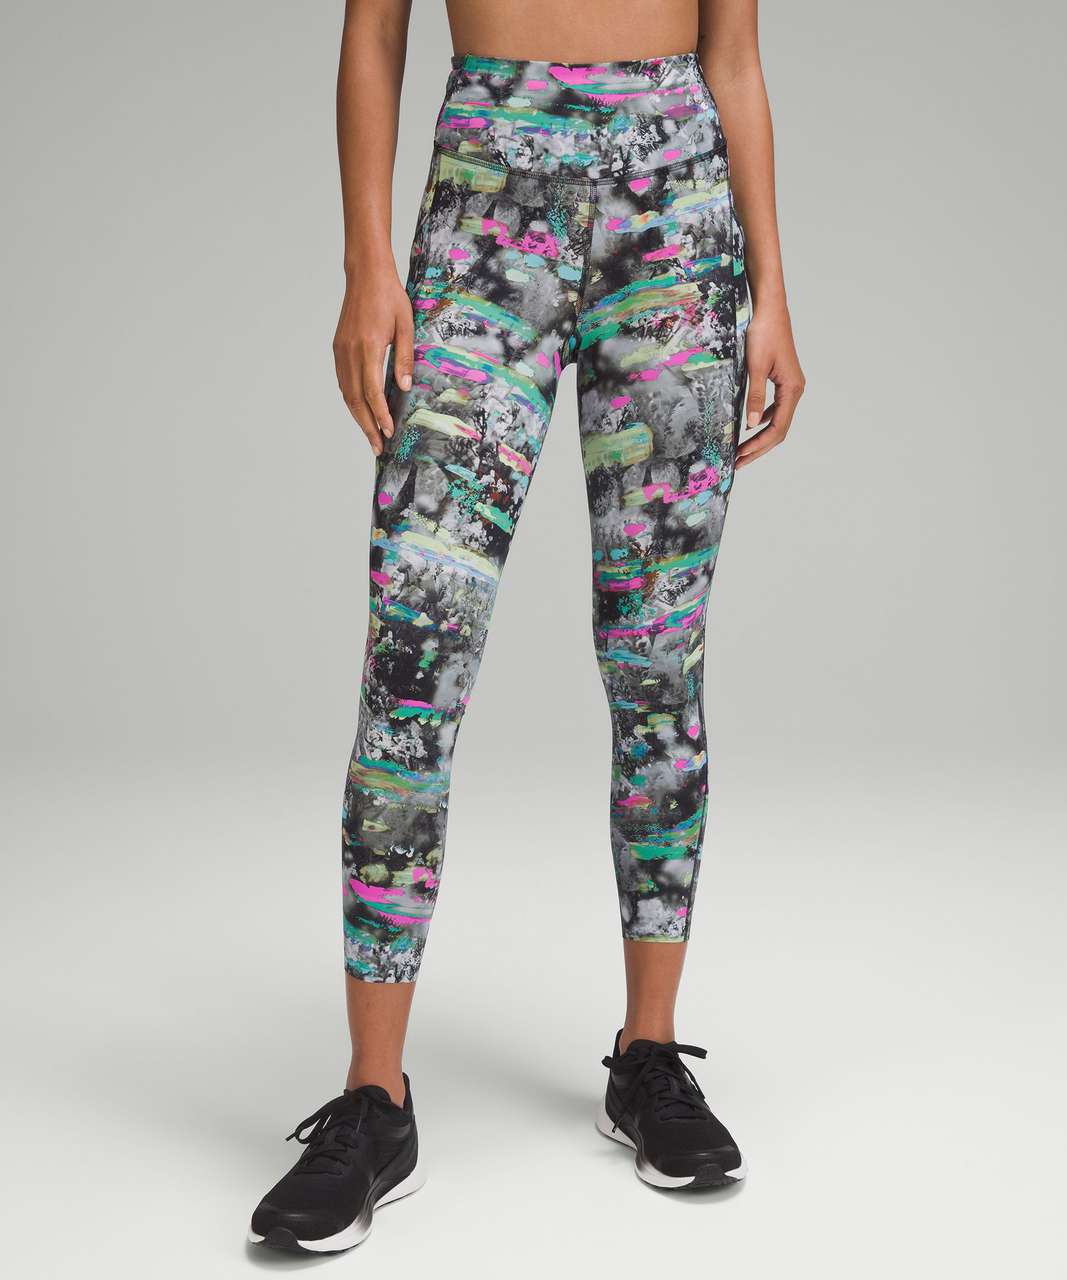 Lululemon Fast and Free High-Rise Tight 25 *Pockets - Paint Drift